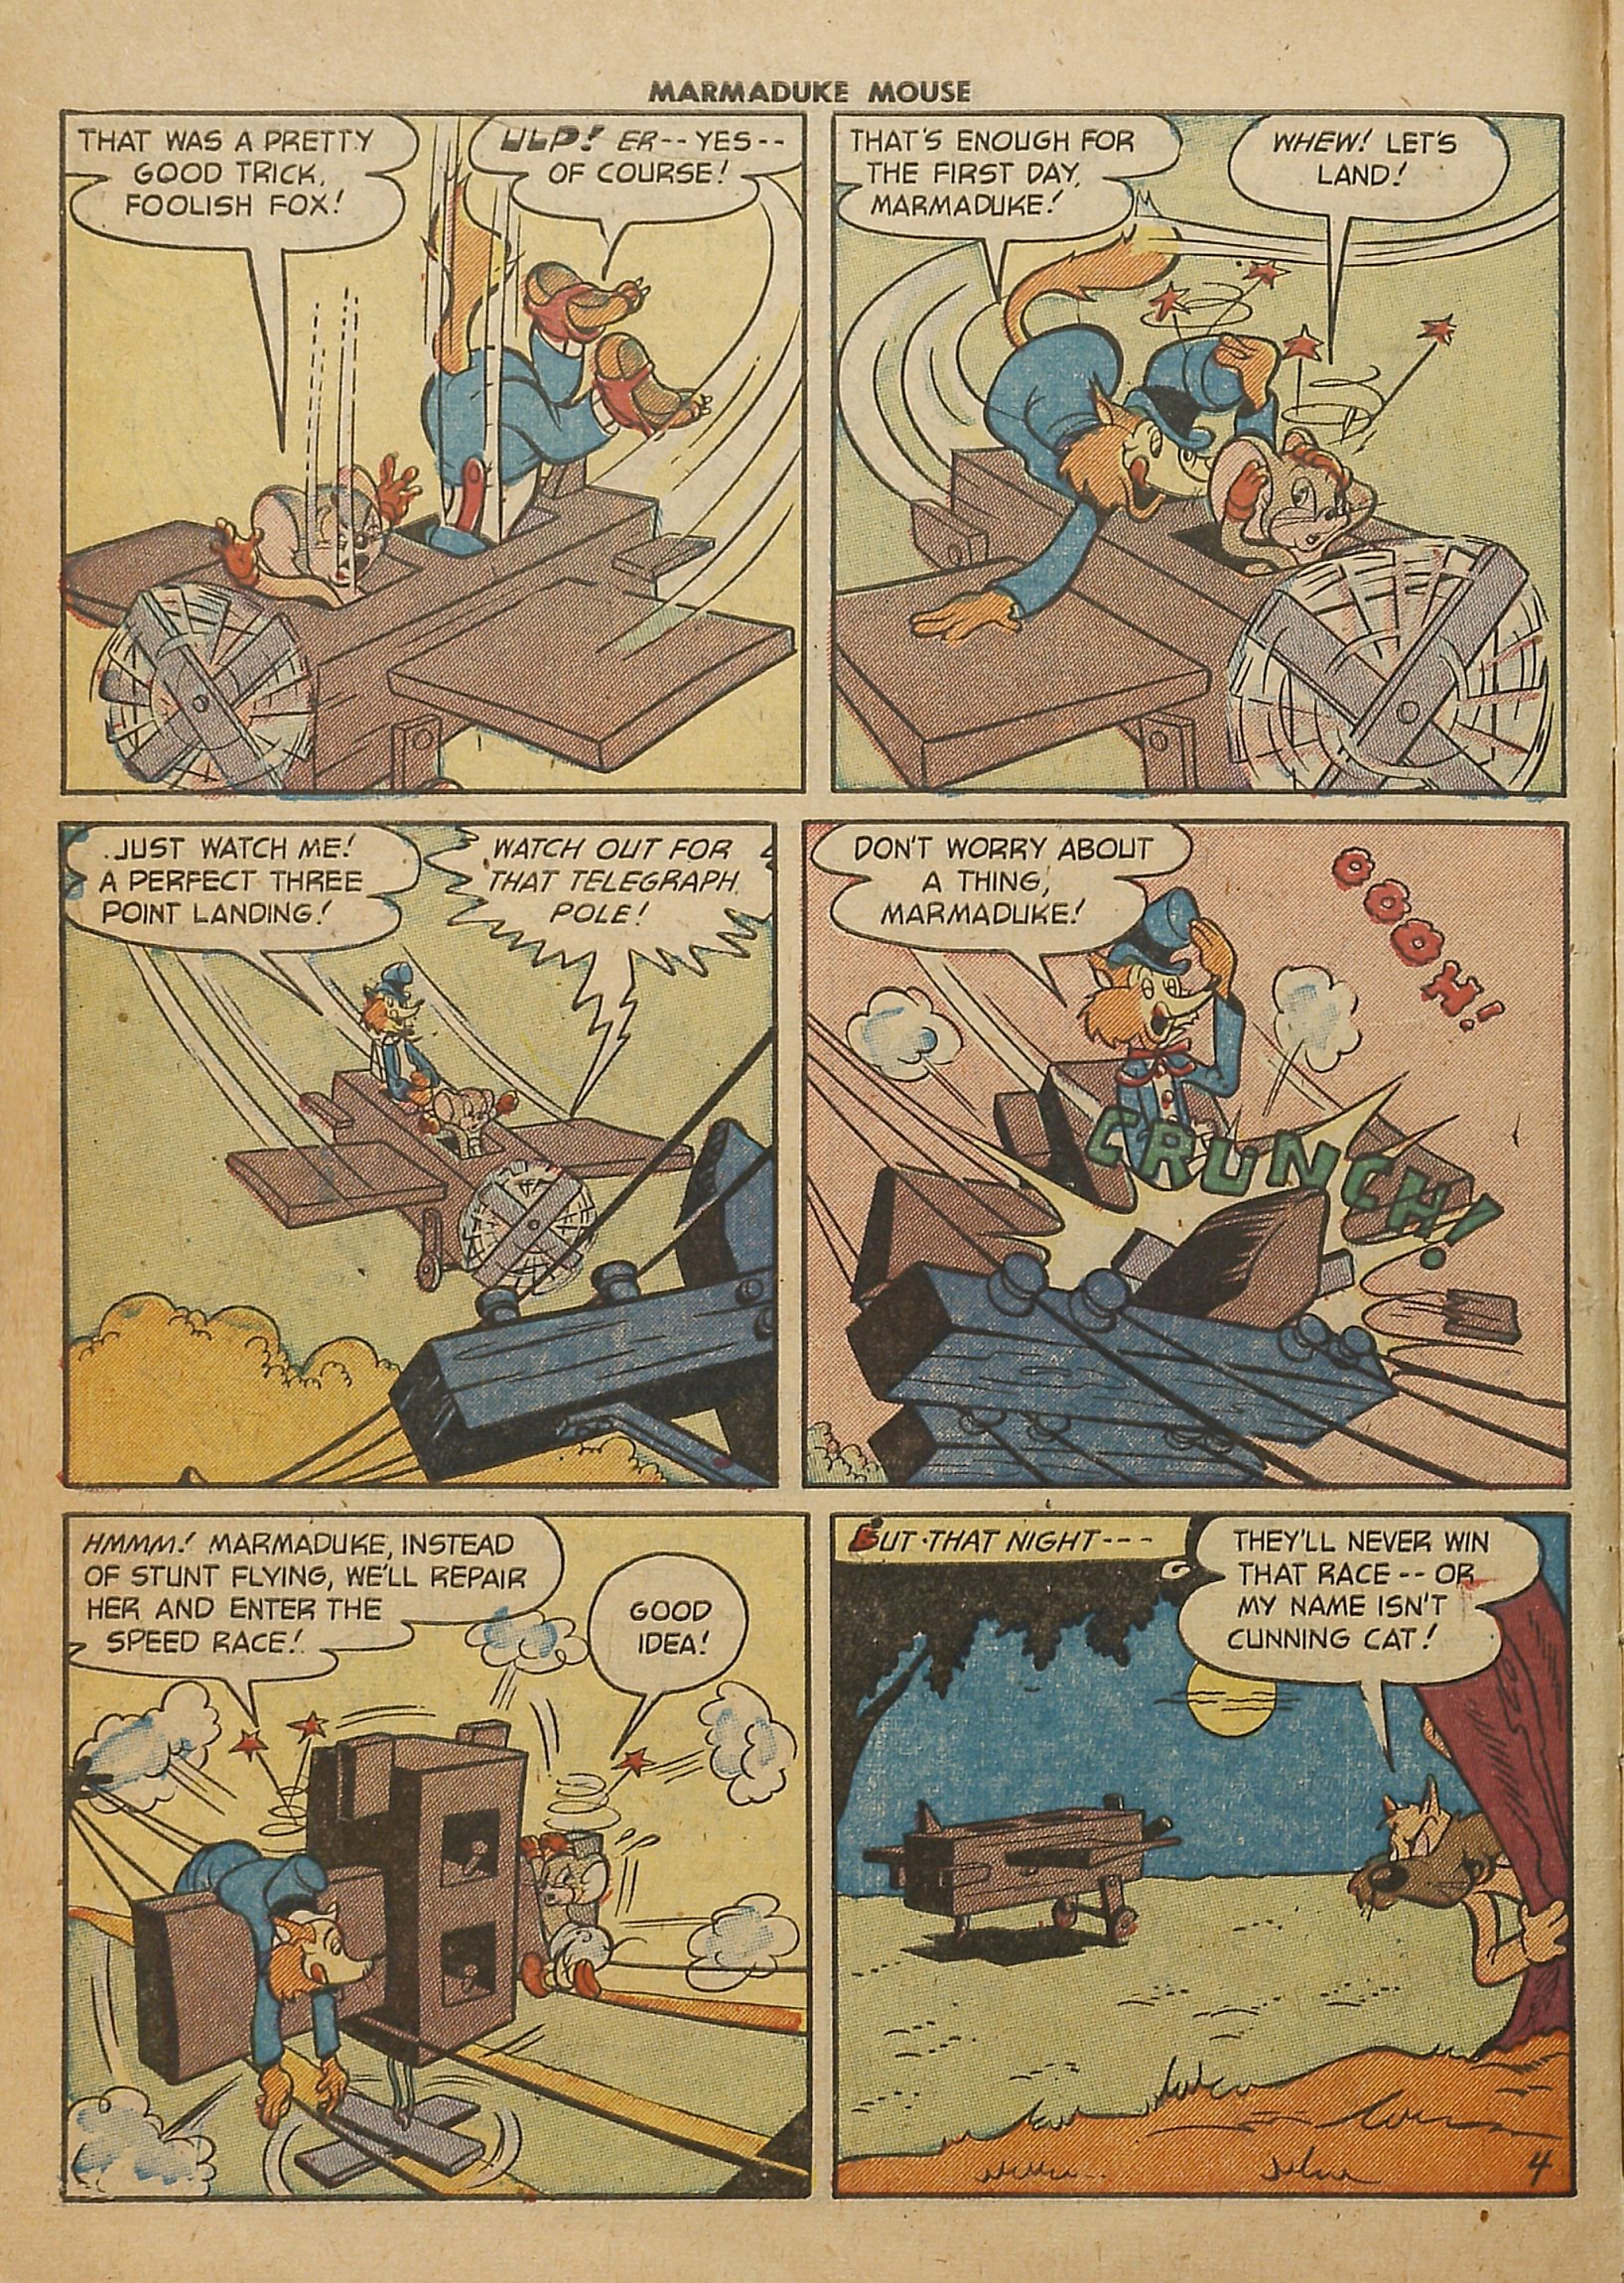 Read online Marmaduke Mouse comic -  Issue #37 - 6